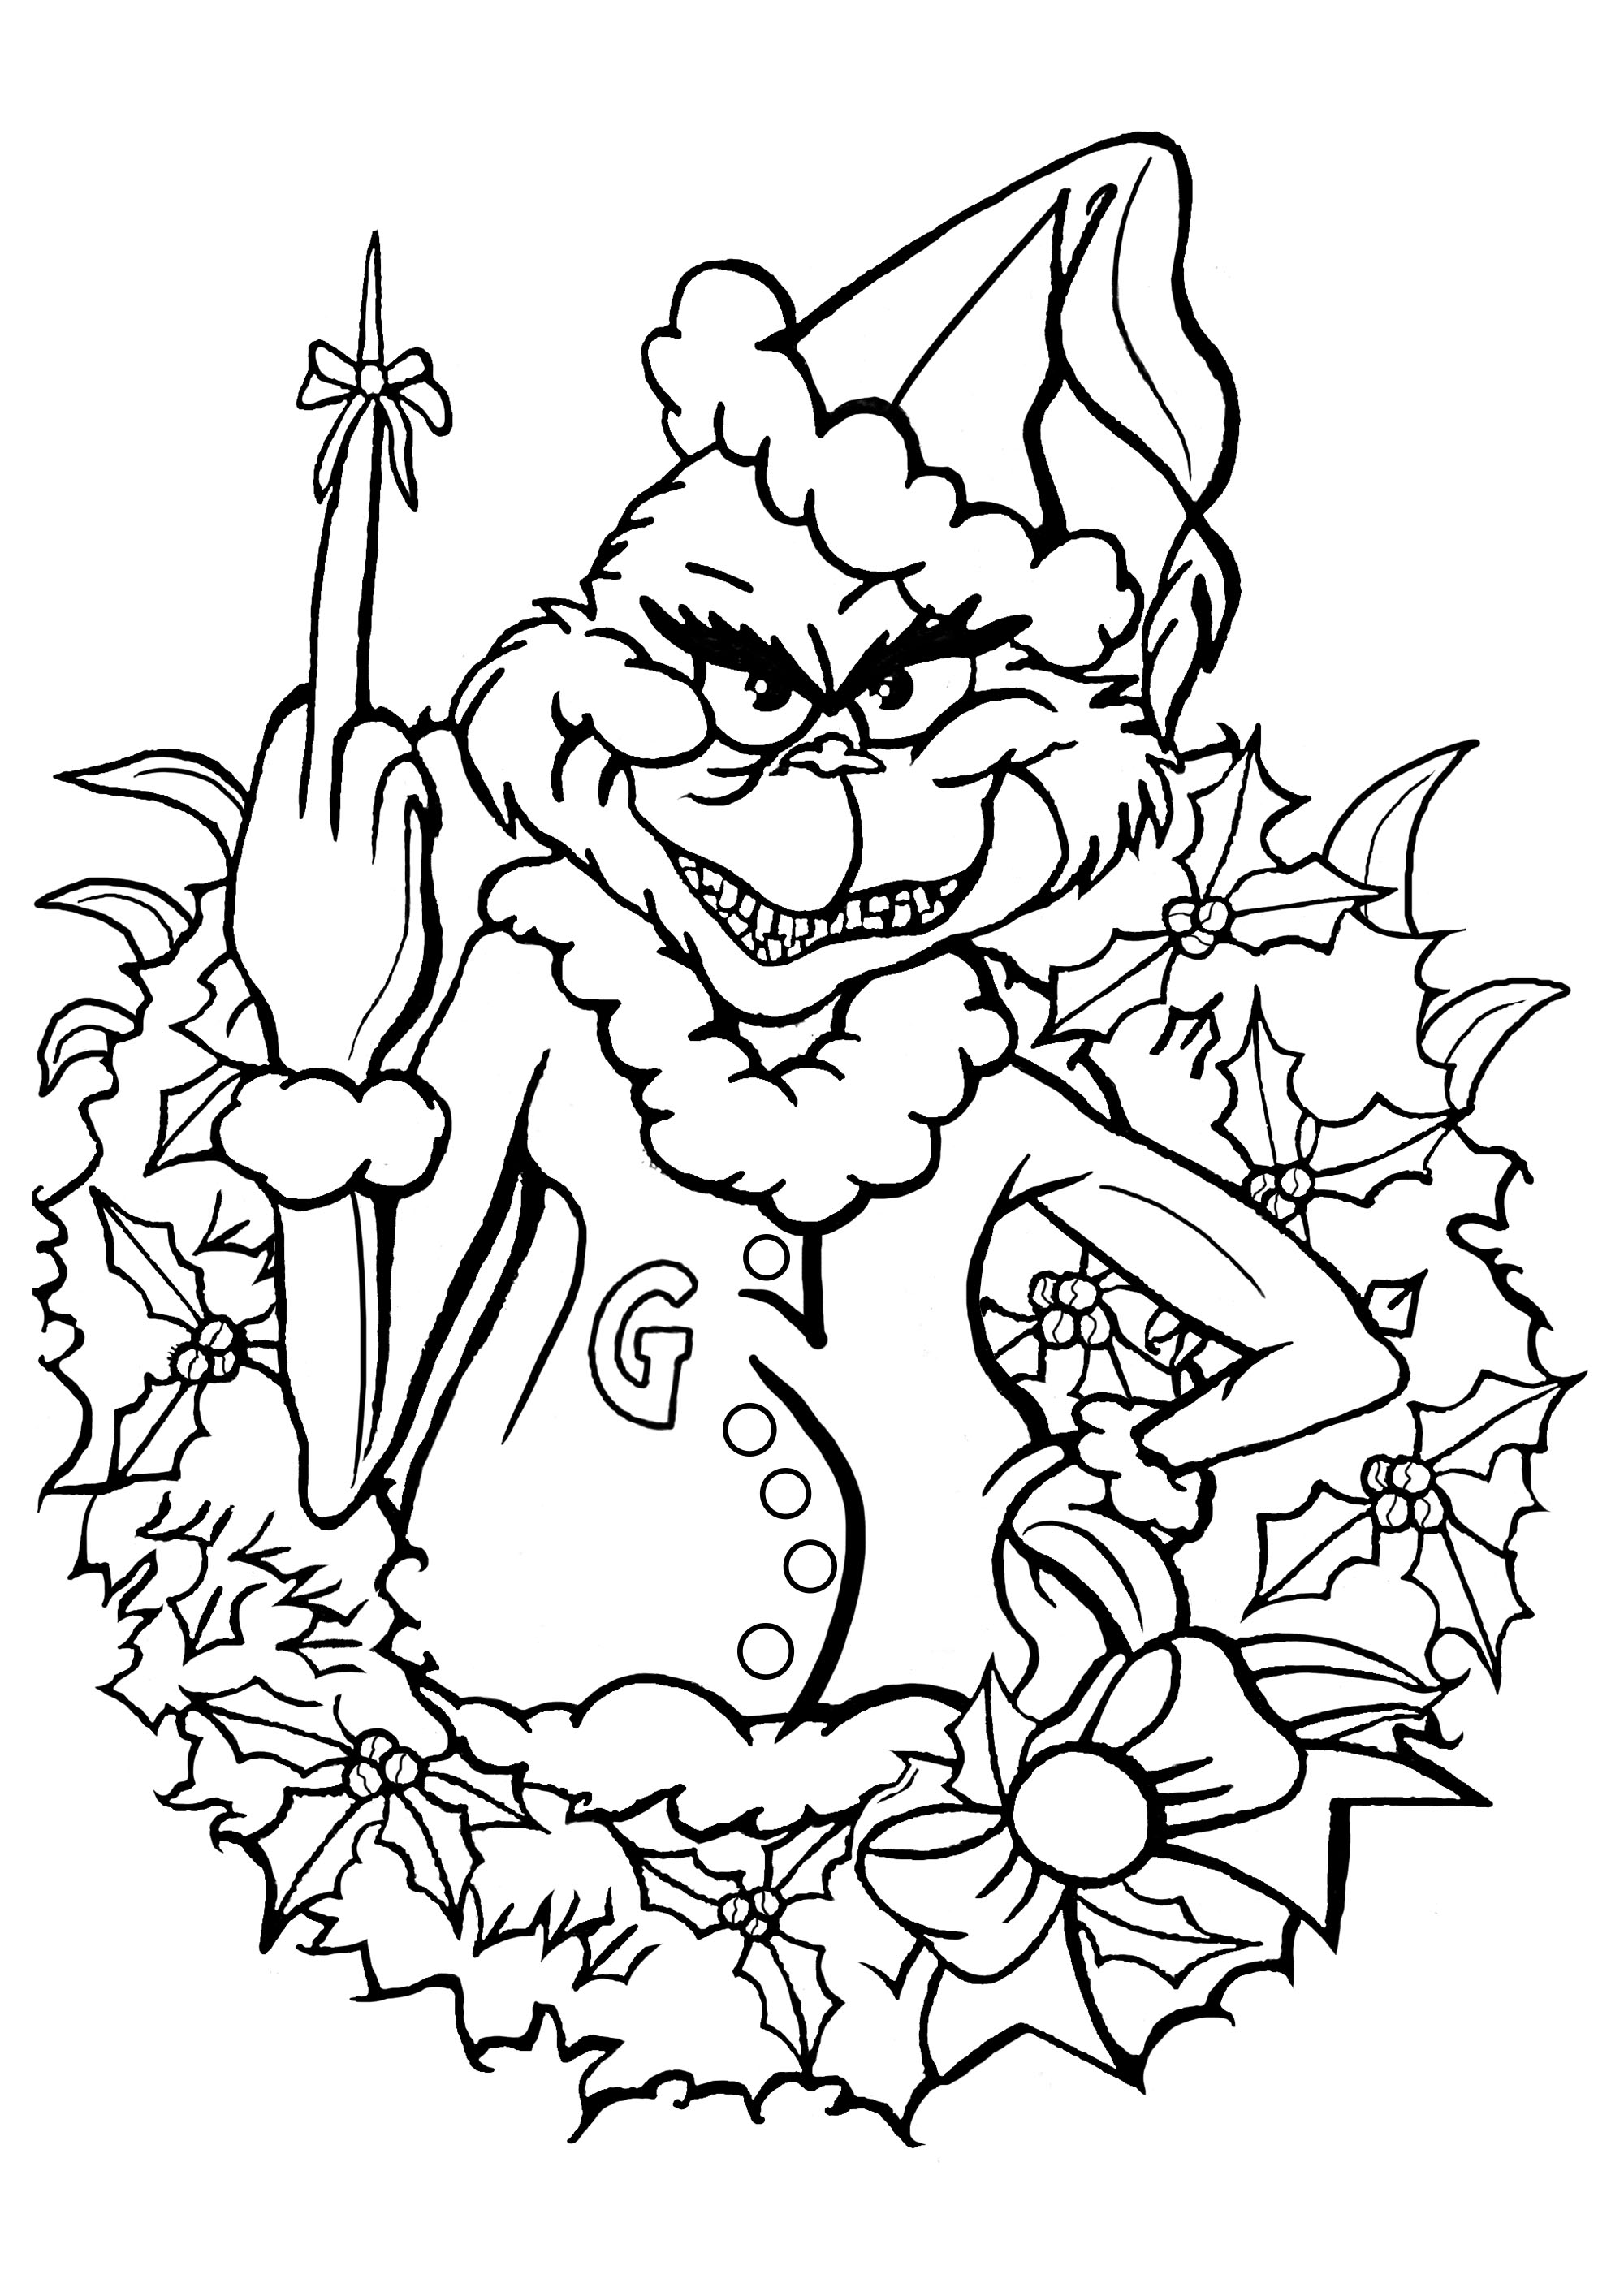 Scary Grinch With Wreath Coloring Page - Free Printable ...